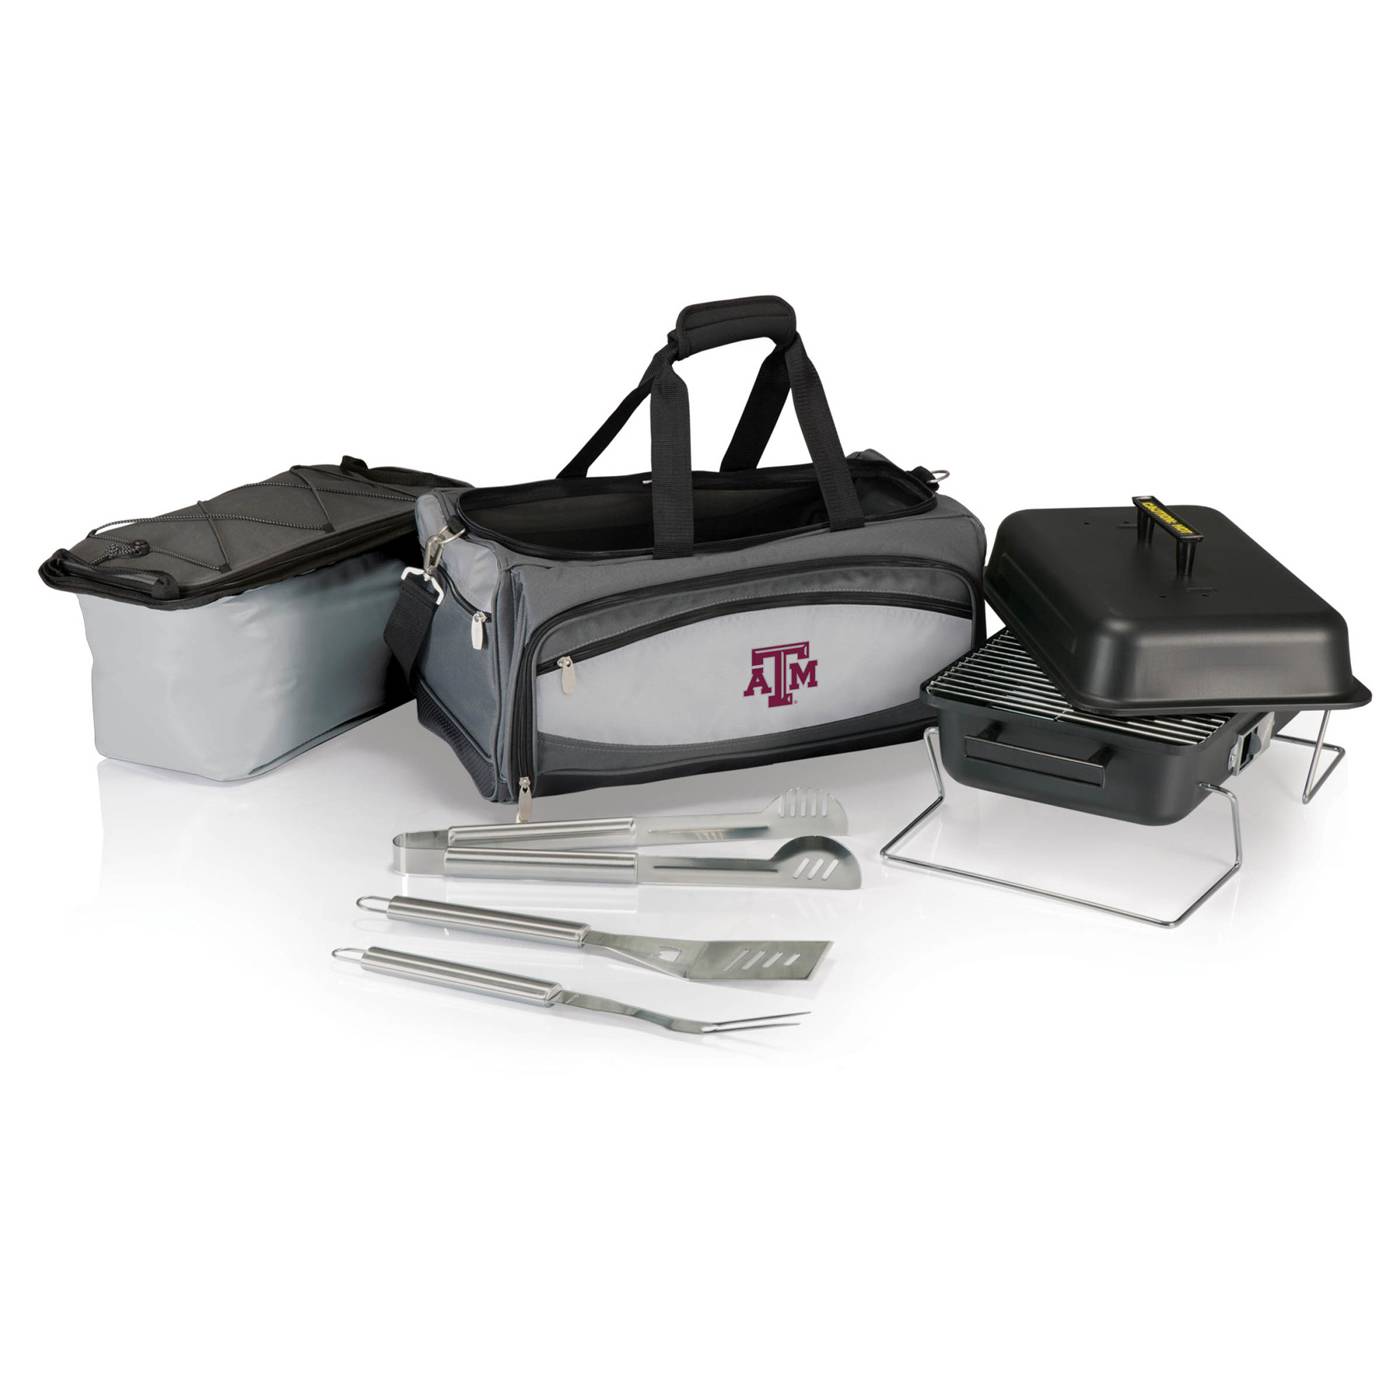 NCAA Texas A and M Aggies Buccaneer Tailgating Cooler with Grill 